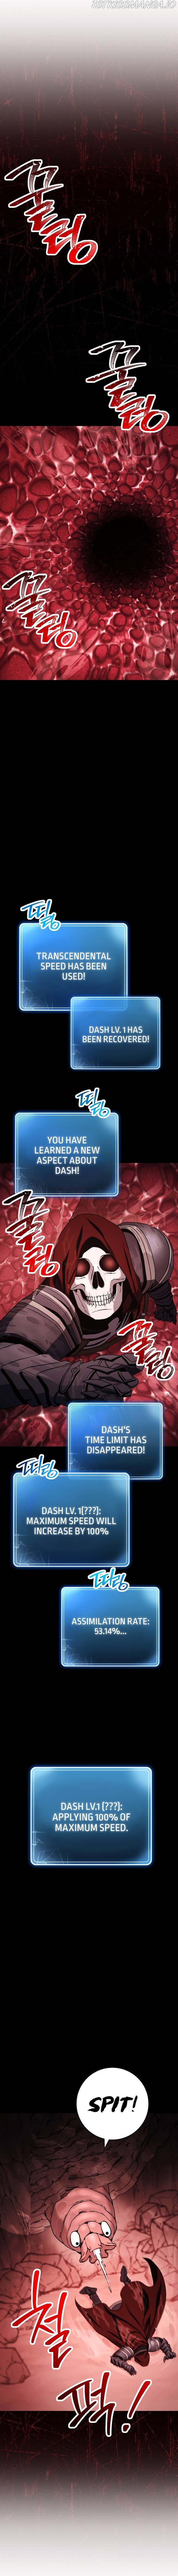 The Skeleton Soldier Failed to Defend the Dungeon [Official] chapter 221